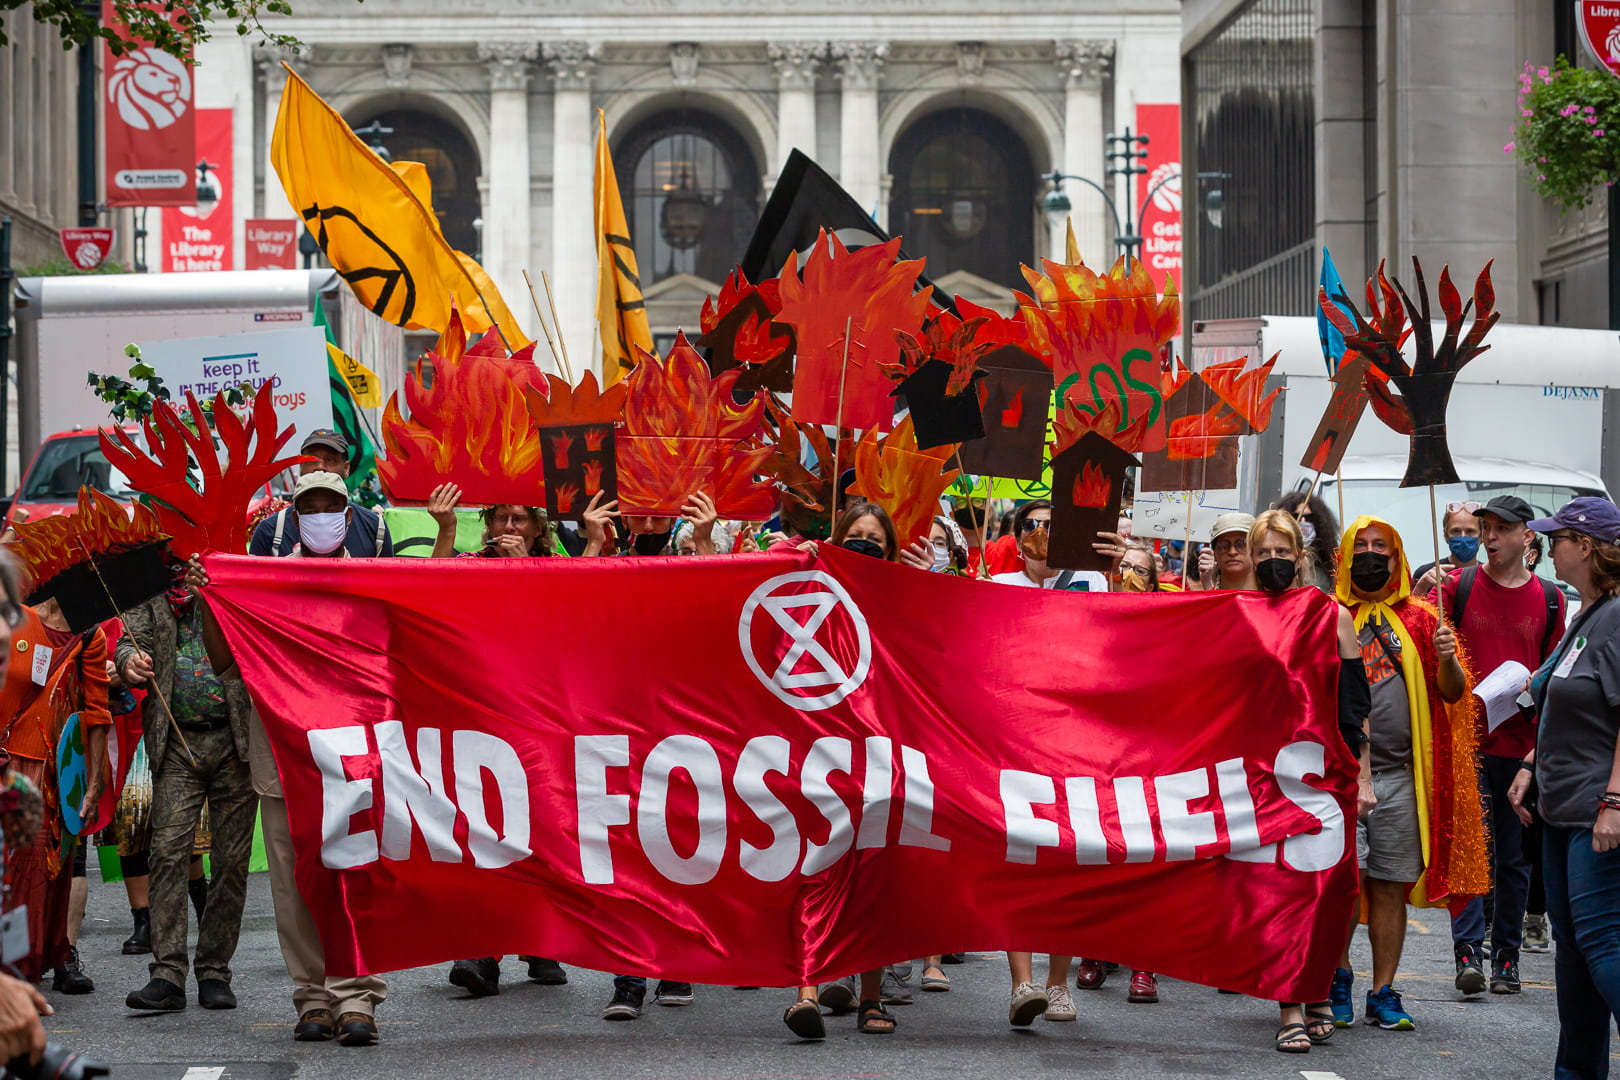 Rebels march through the street in a column with flags and fire imagery above and an end fossil fuels banner at the front.